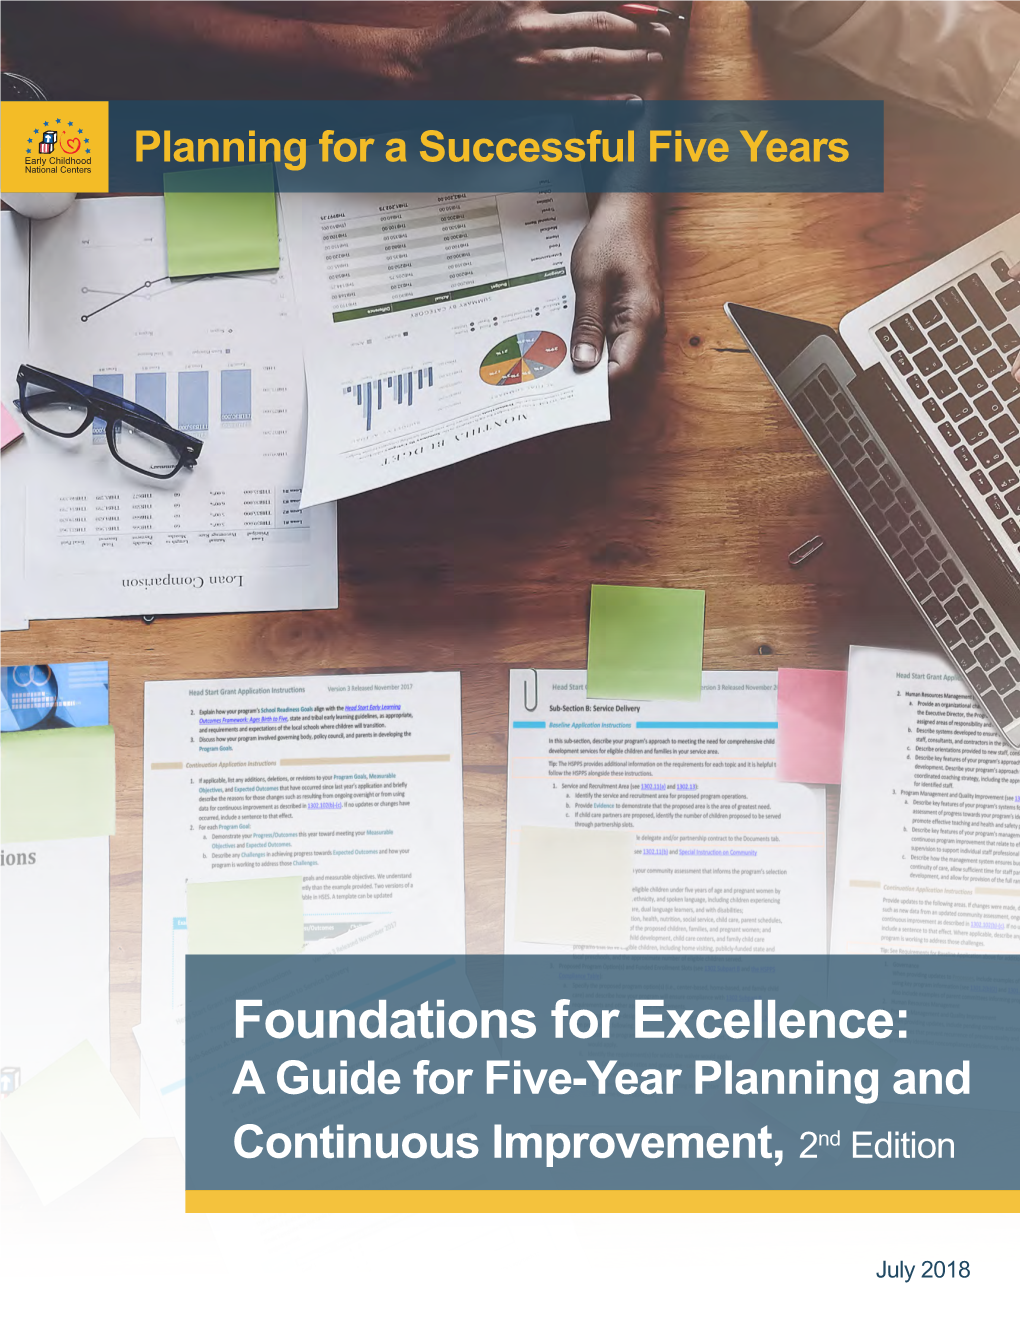 Foundations for Excellence:A Guide for Five-Year Planning And